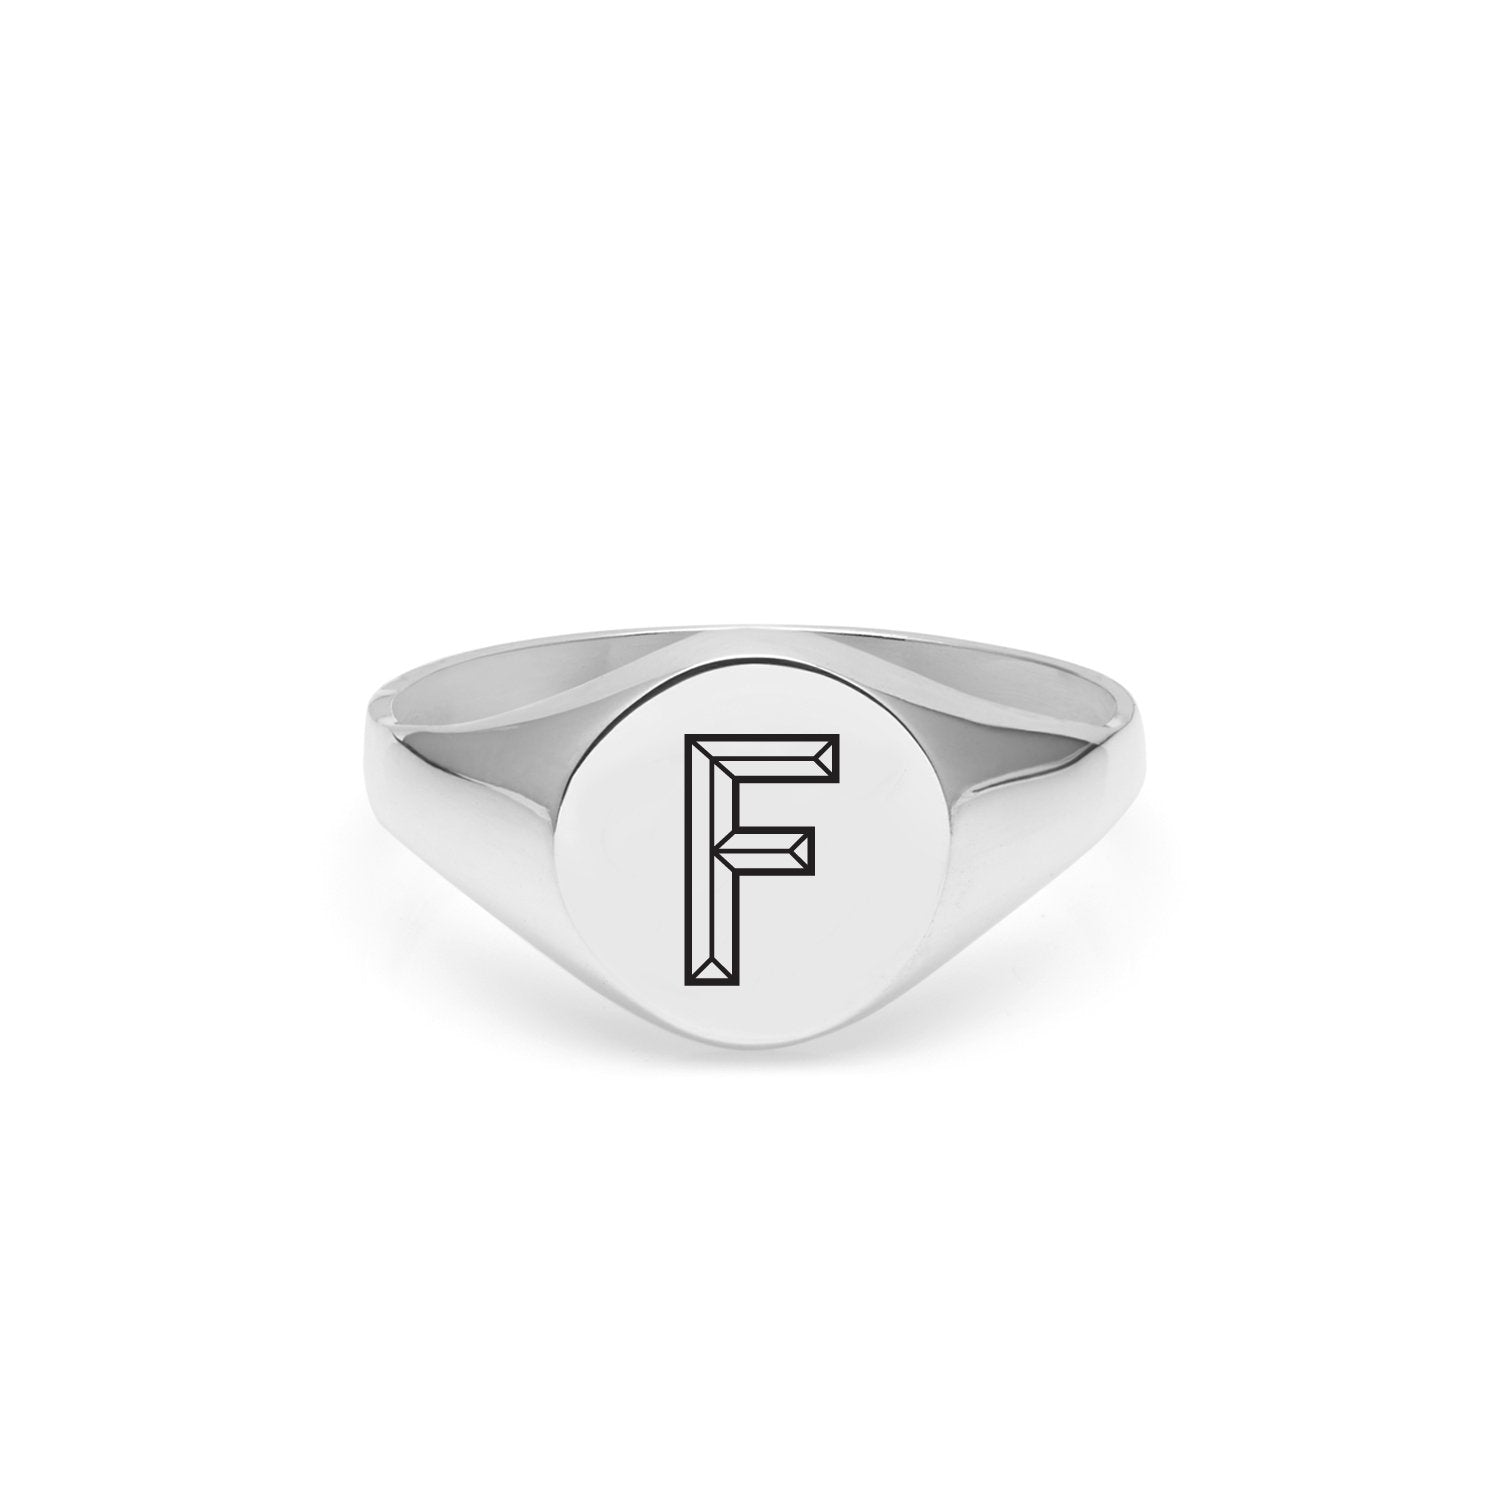 Facett Initial F Round Signet Ring - Silver - Myia Bonner Jewellery